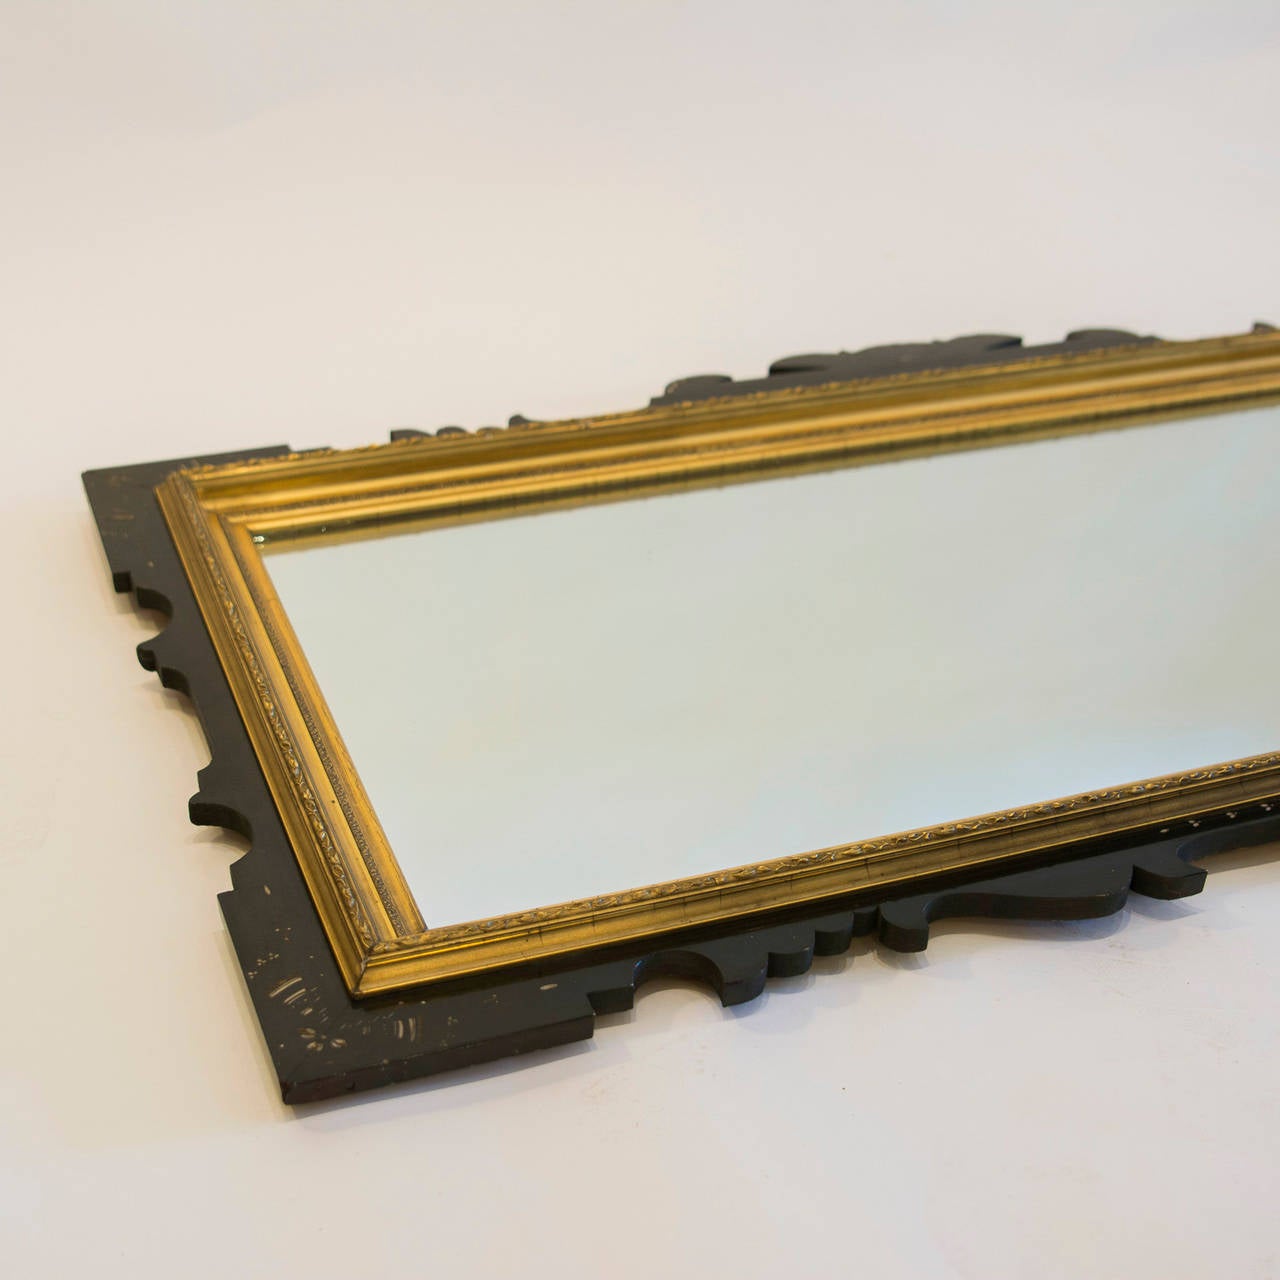 Aesthetic Movement Gilt and Ebonized Overmantel Mirror with Finely Incised Decoration highlighted in off-white. circa 1880
Width: 41¾ in., Height: 22 in ., Depth: 2½ in